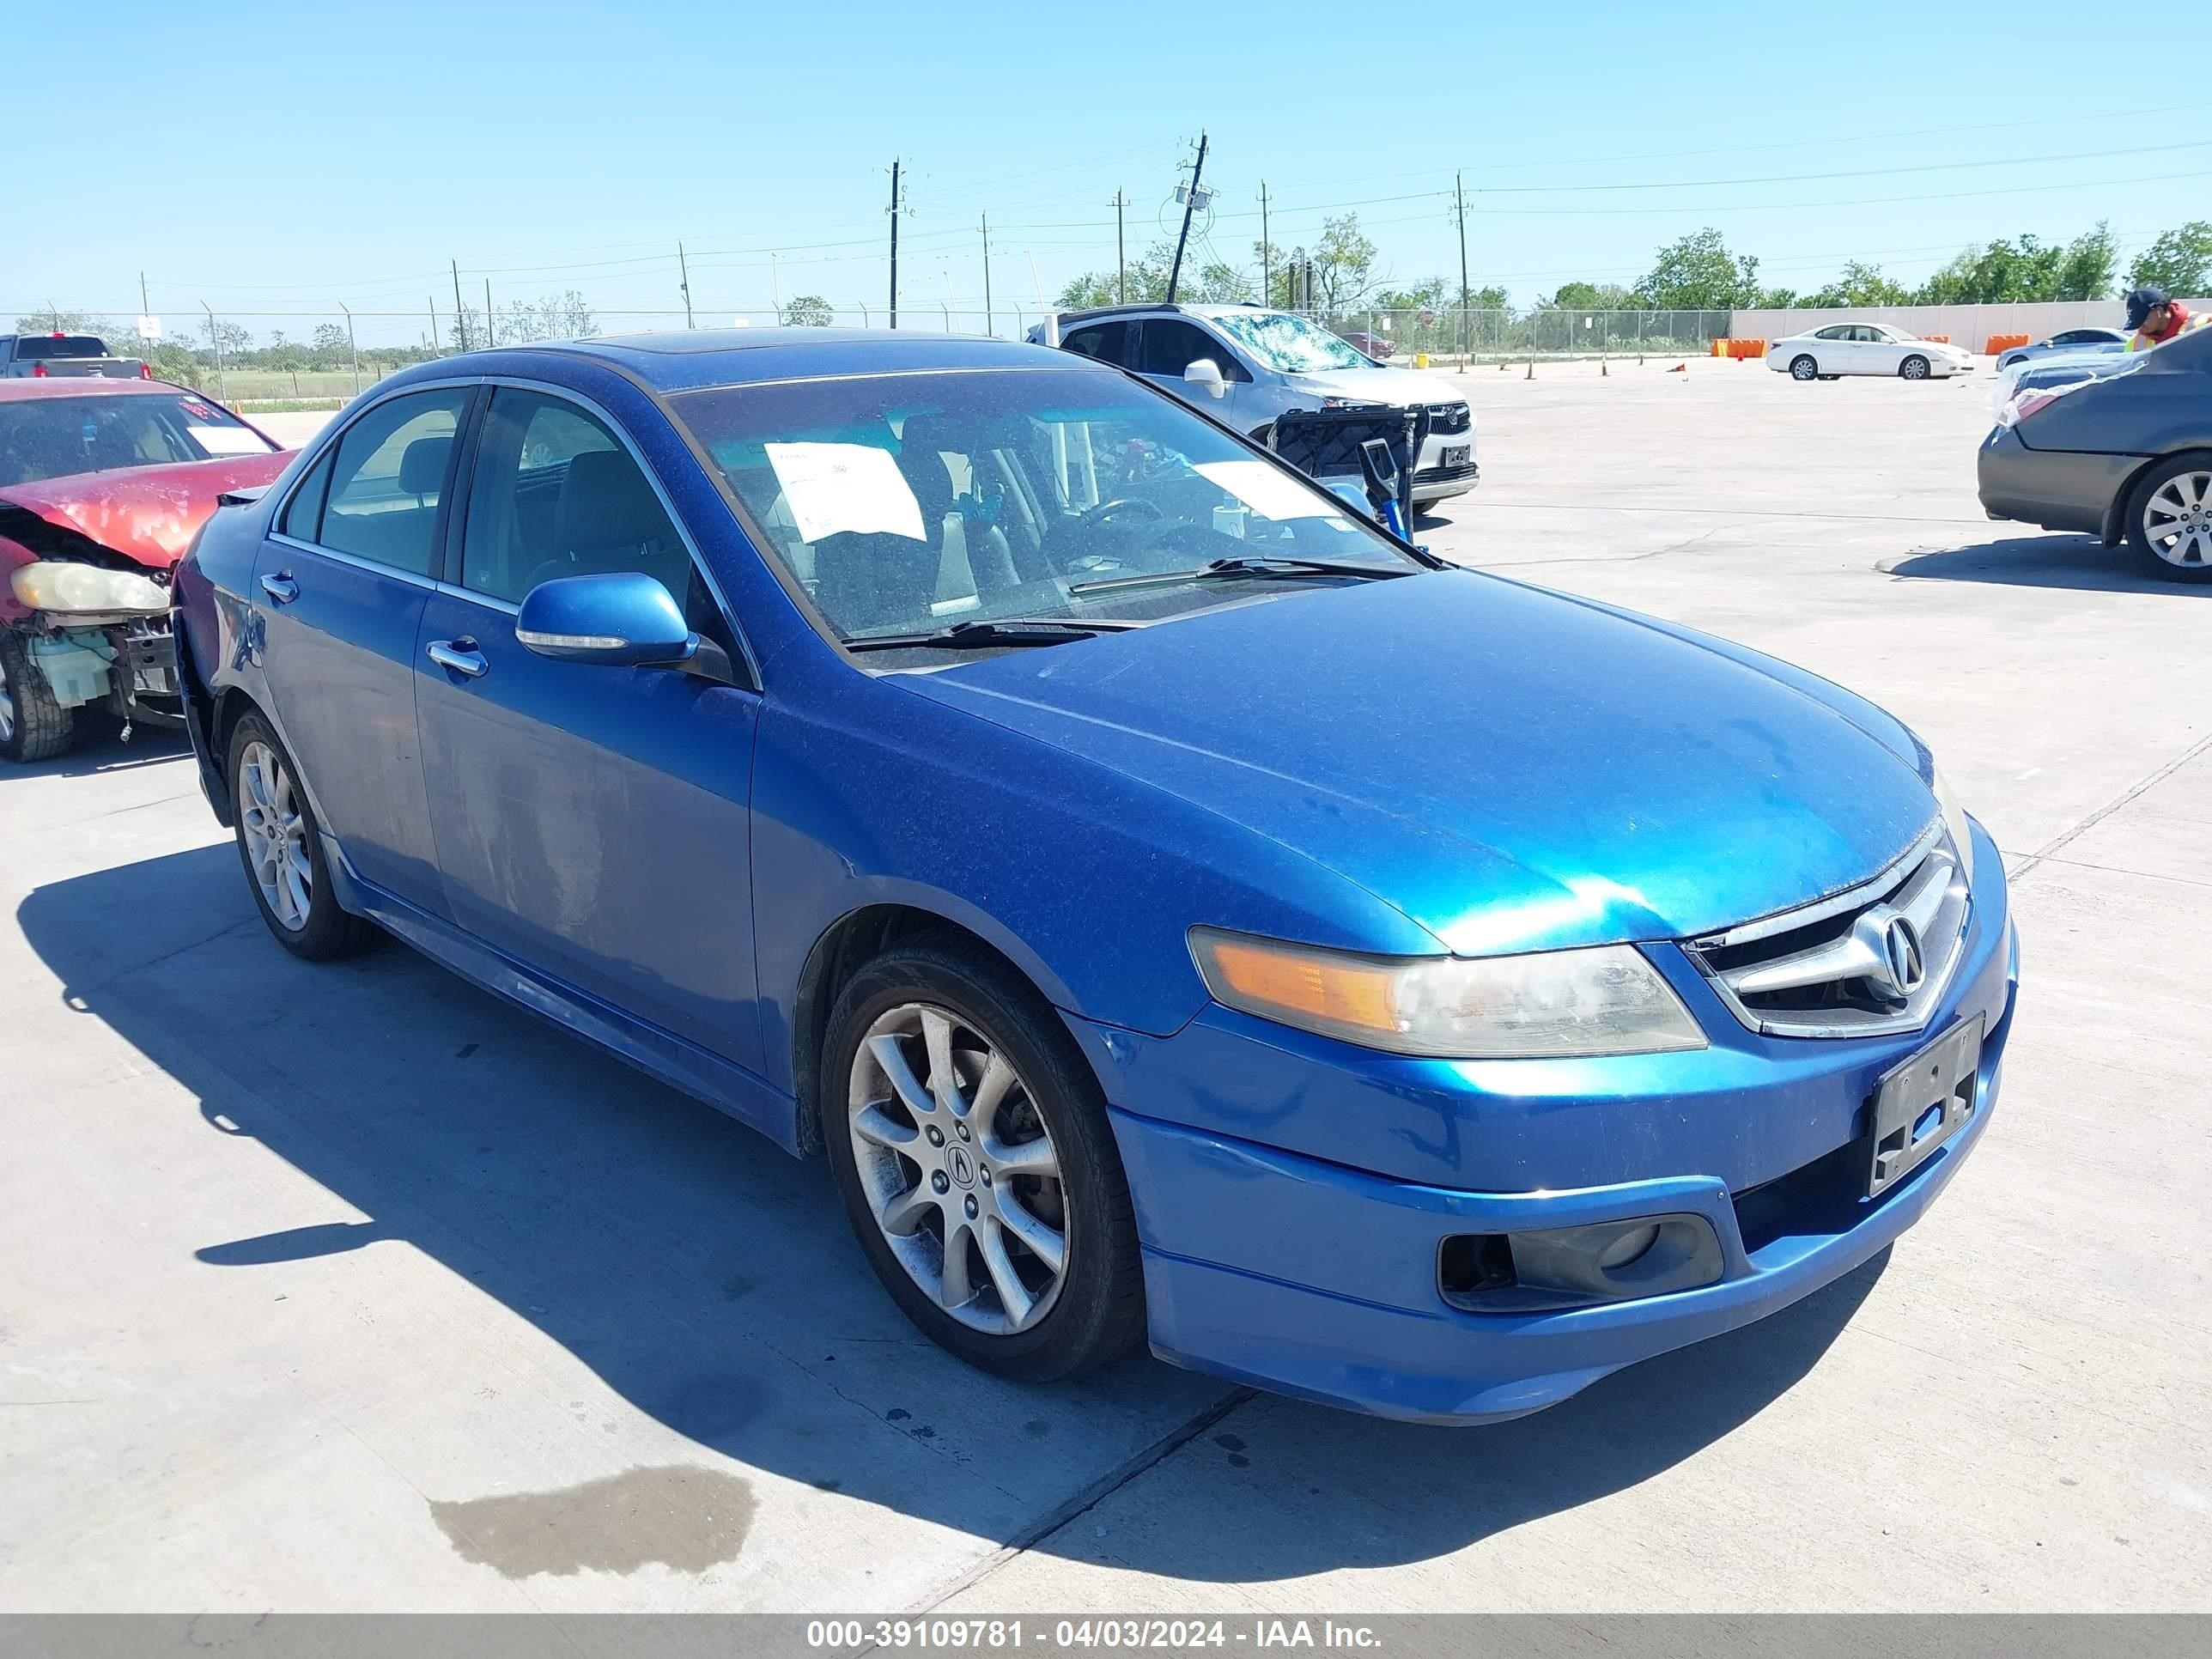 acura tsx 2007 jh4cl96847c016909